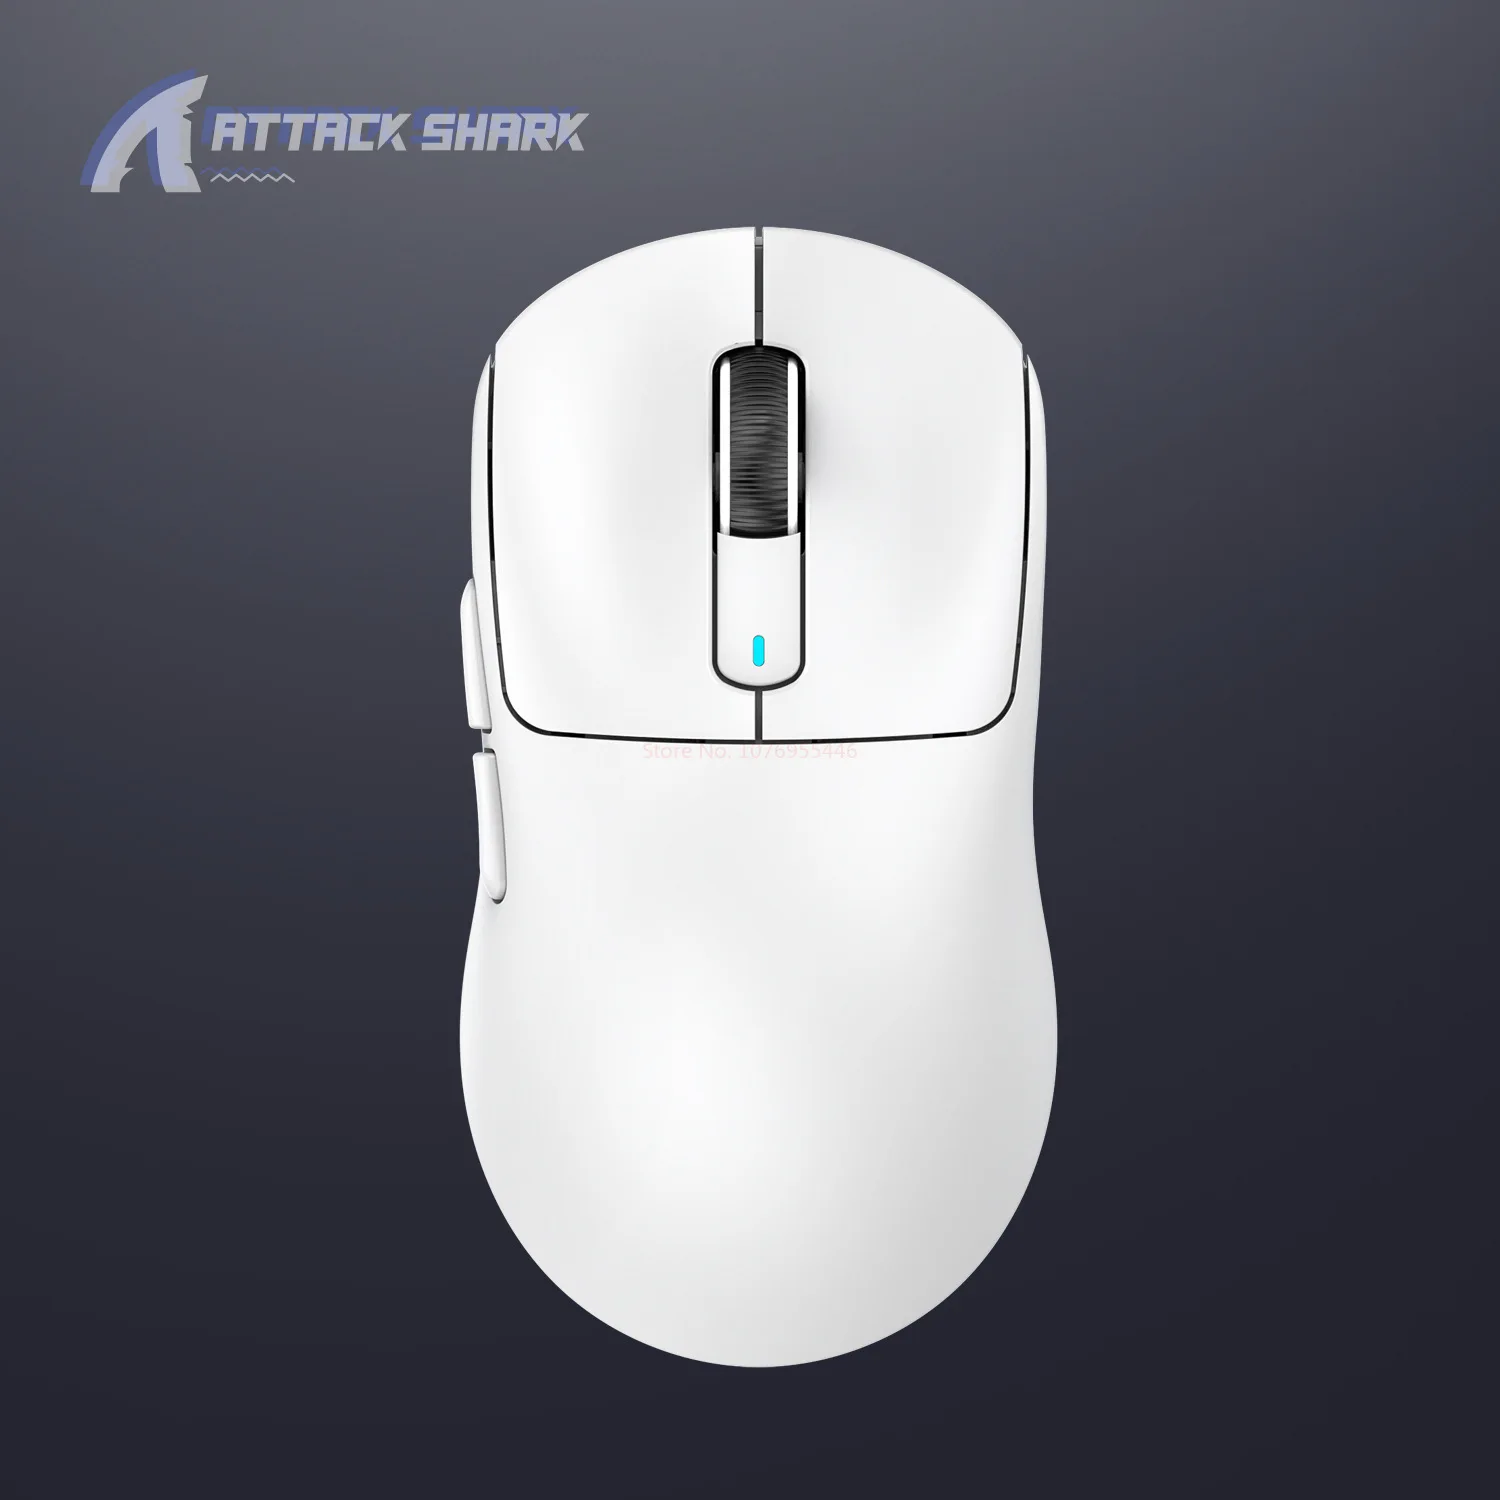 NEW Attack Shark X3 2.4G Wireless Mouse Bluebooth Three Mode Lightweight  PAW3395 Esports Gaming Mouse - AliExpress